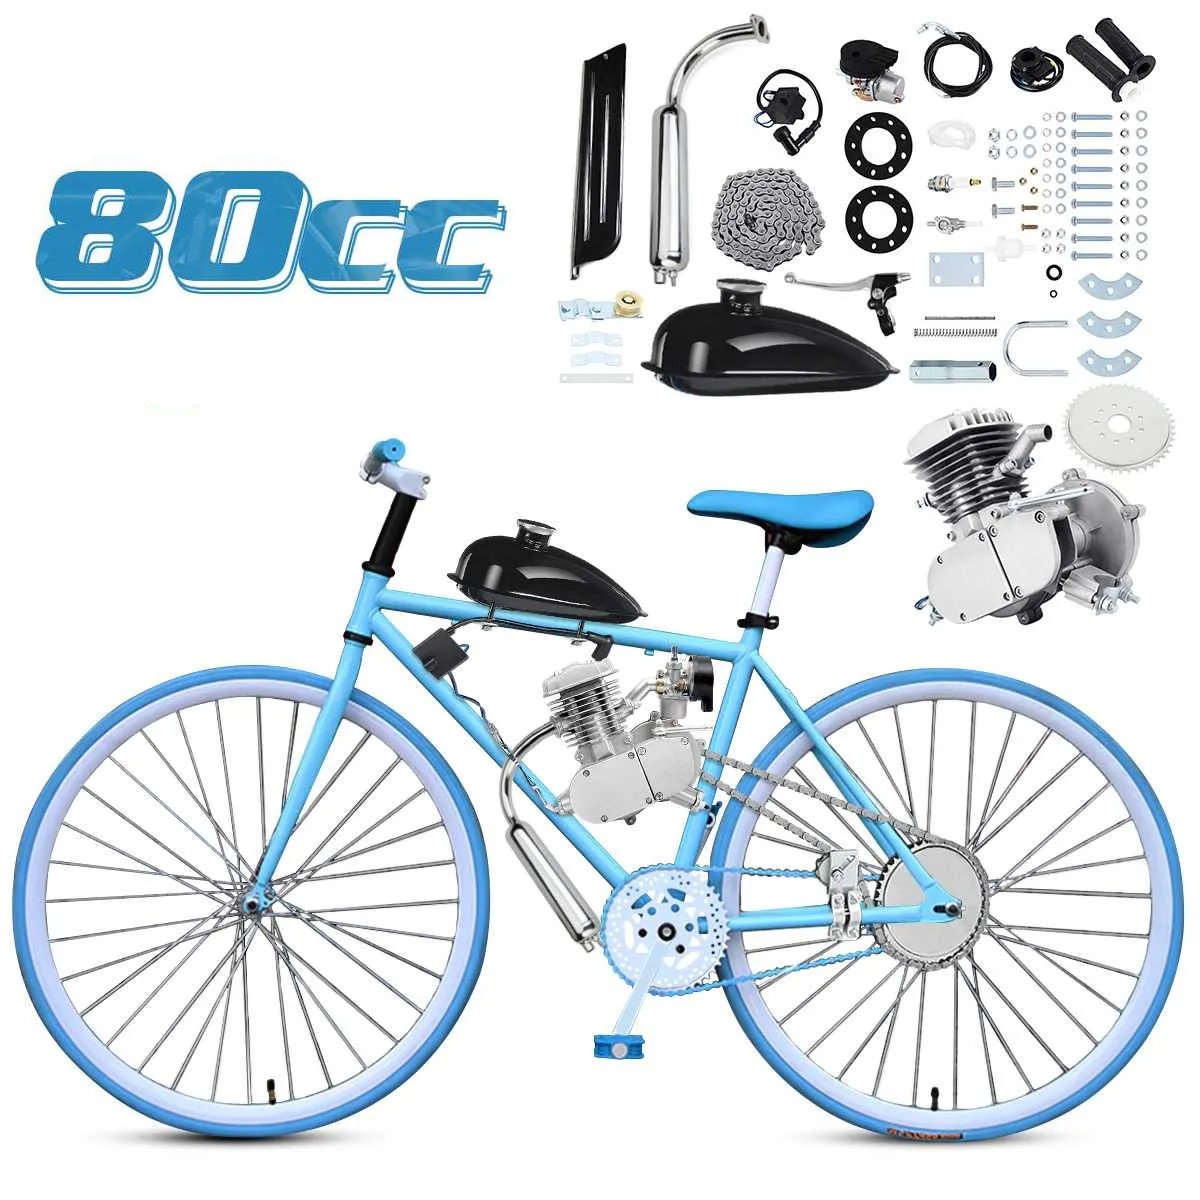 Roco Parts offers you a 2-stroke electric bike kit! Order now!